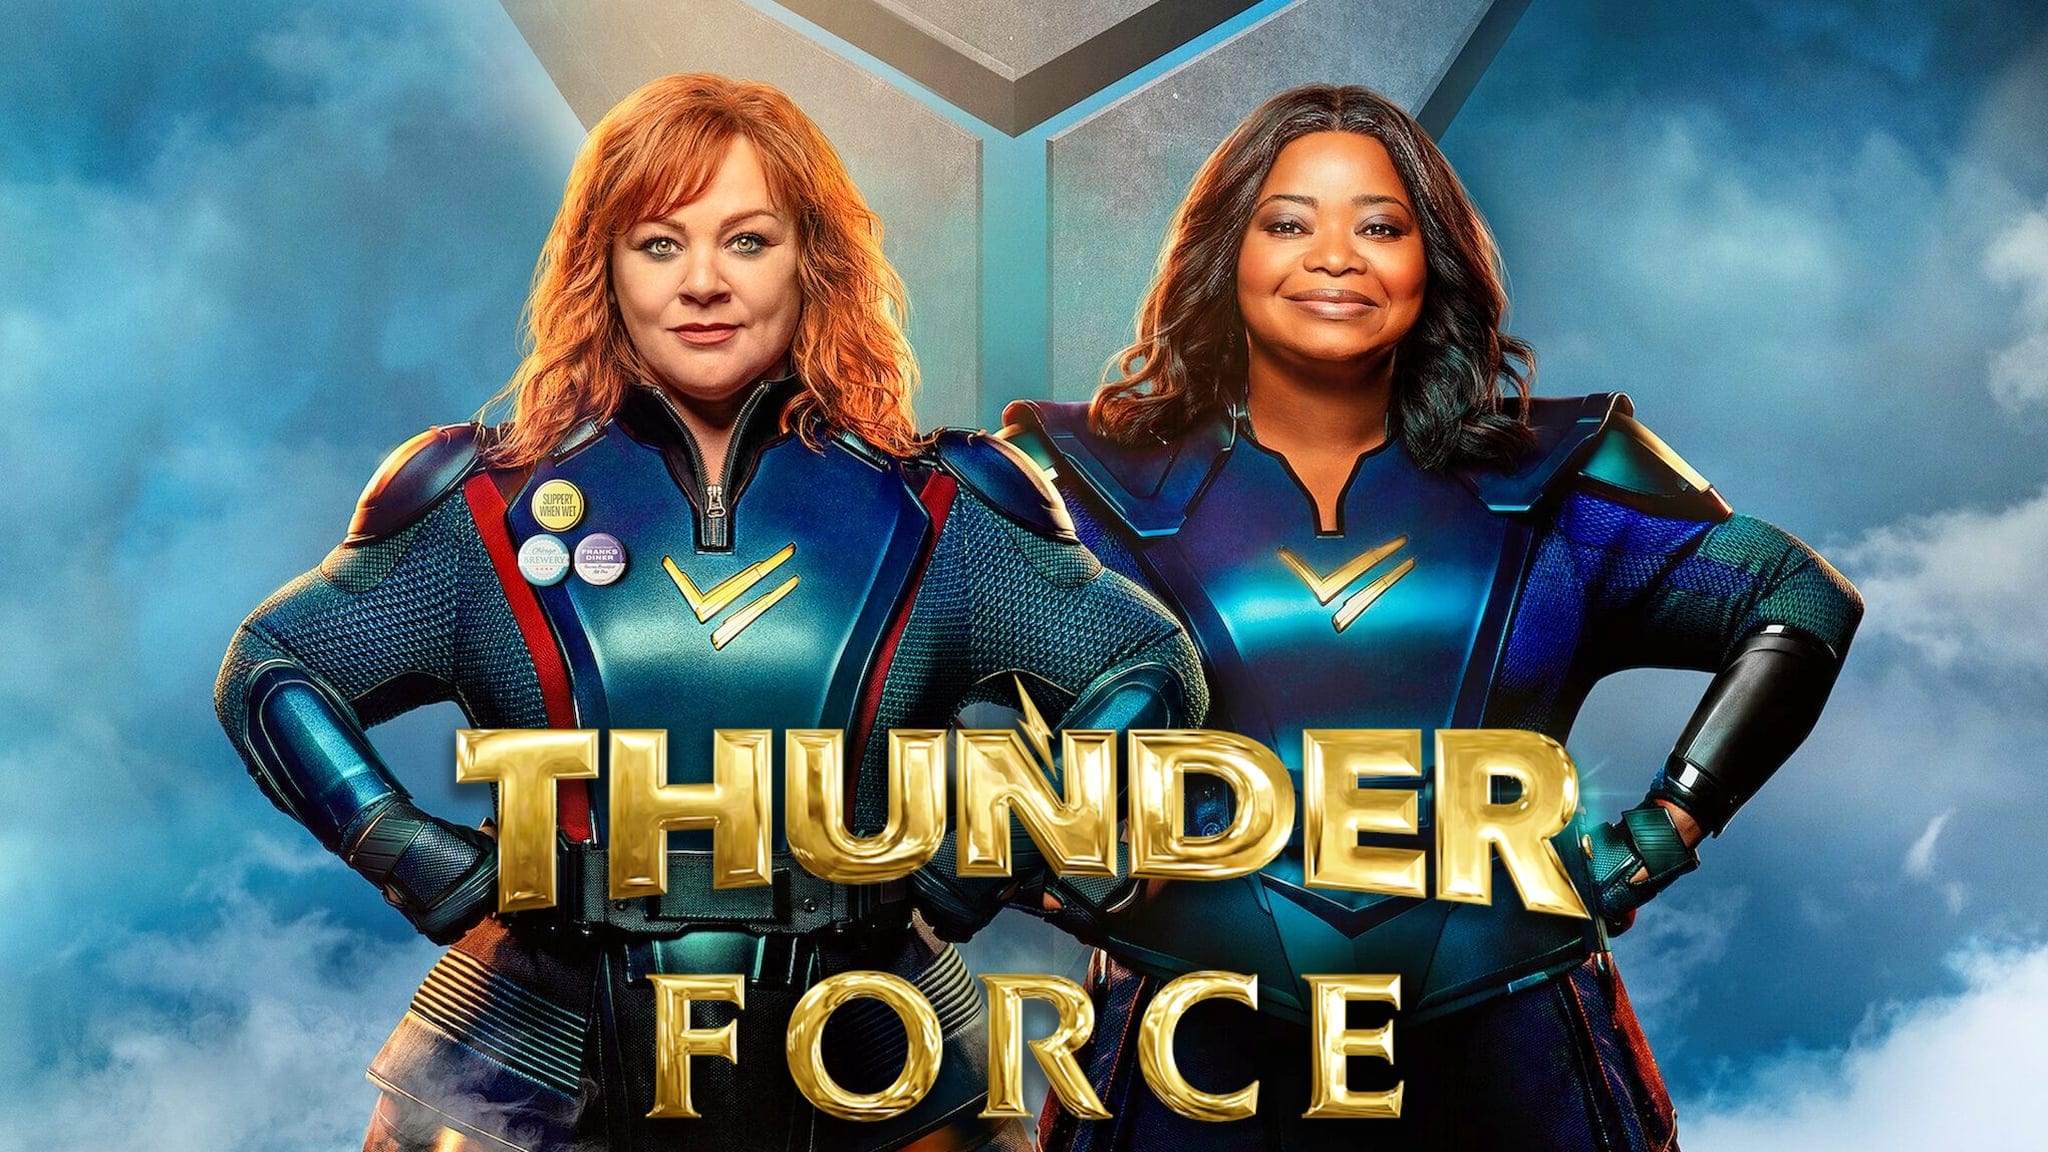  Movie cover for the 2021 film Thunder Force, showing Melissa McCcarthy and Octavia Spencer power posing wearing superhero costumes